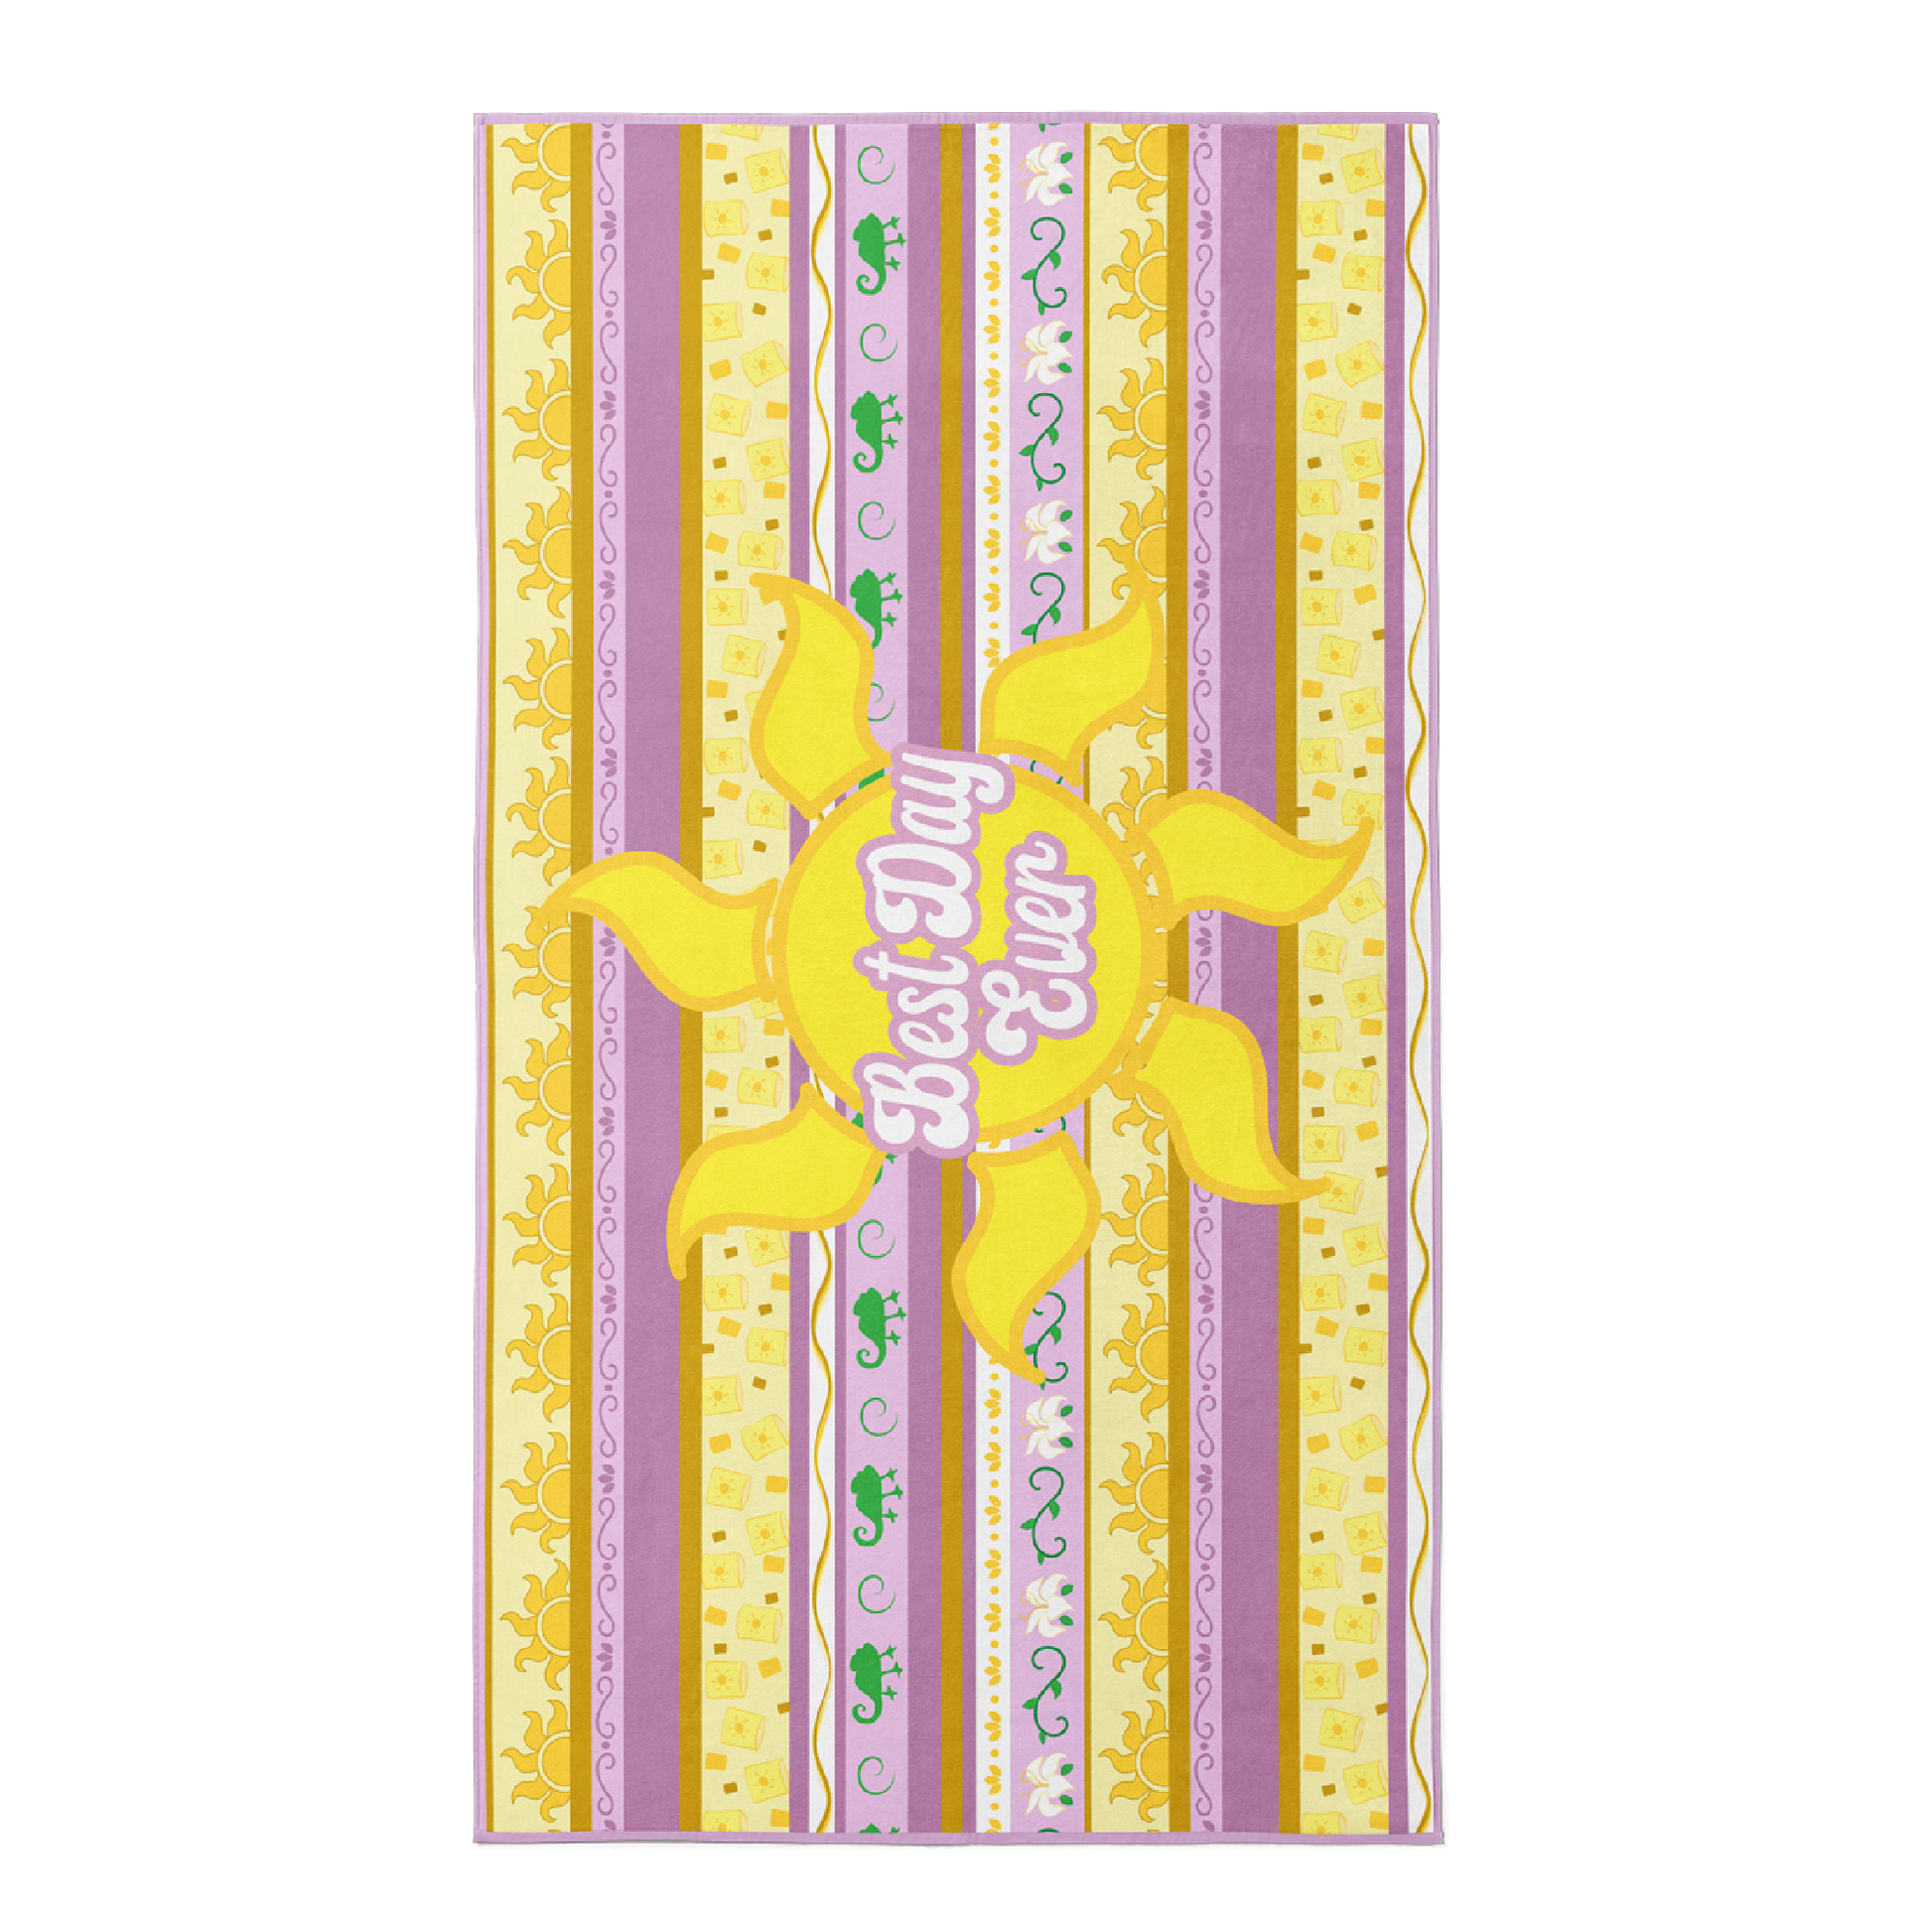 Beach towel in golden yellow, lavender, and light purple with golden sun and princess quote "Best Day ever".